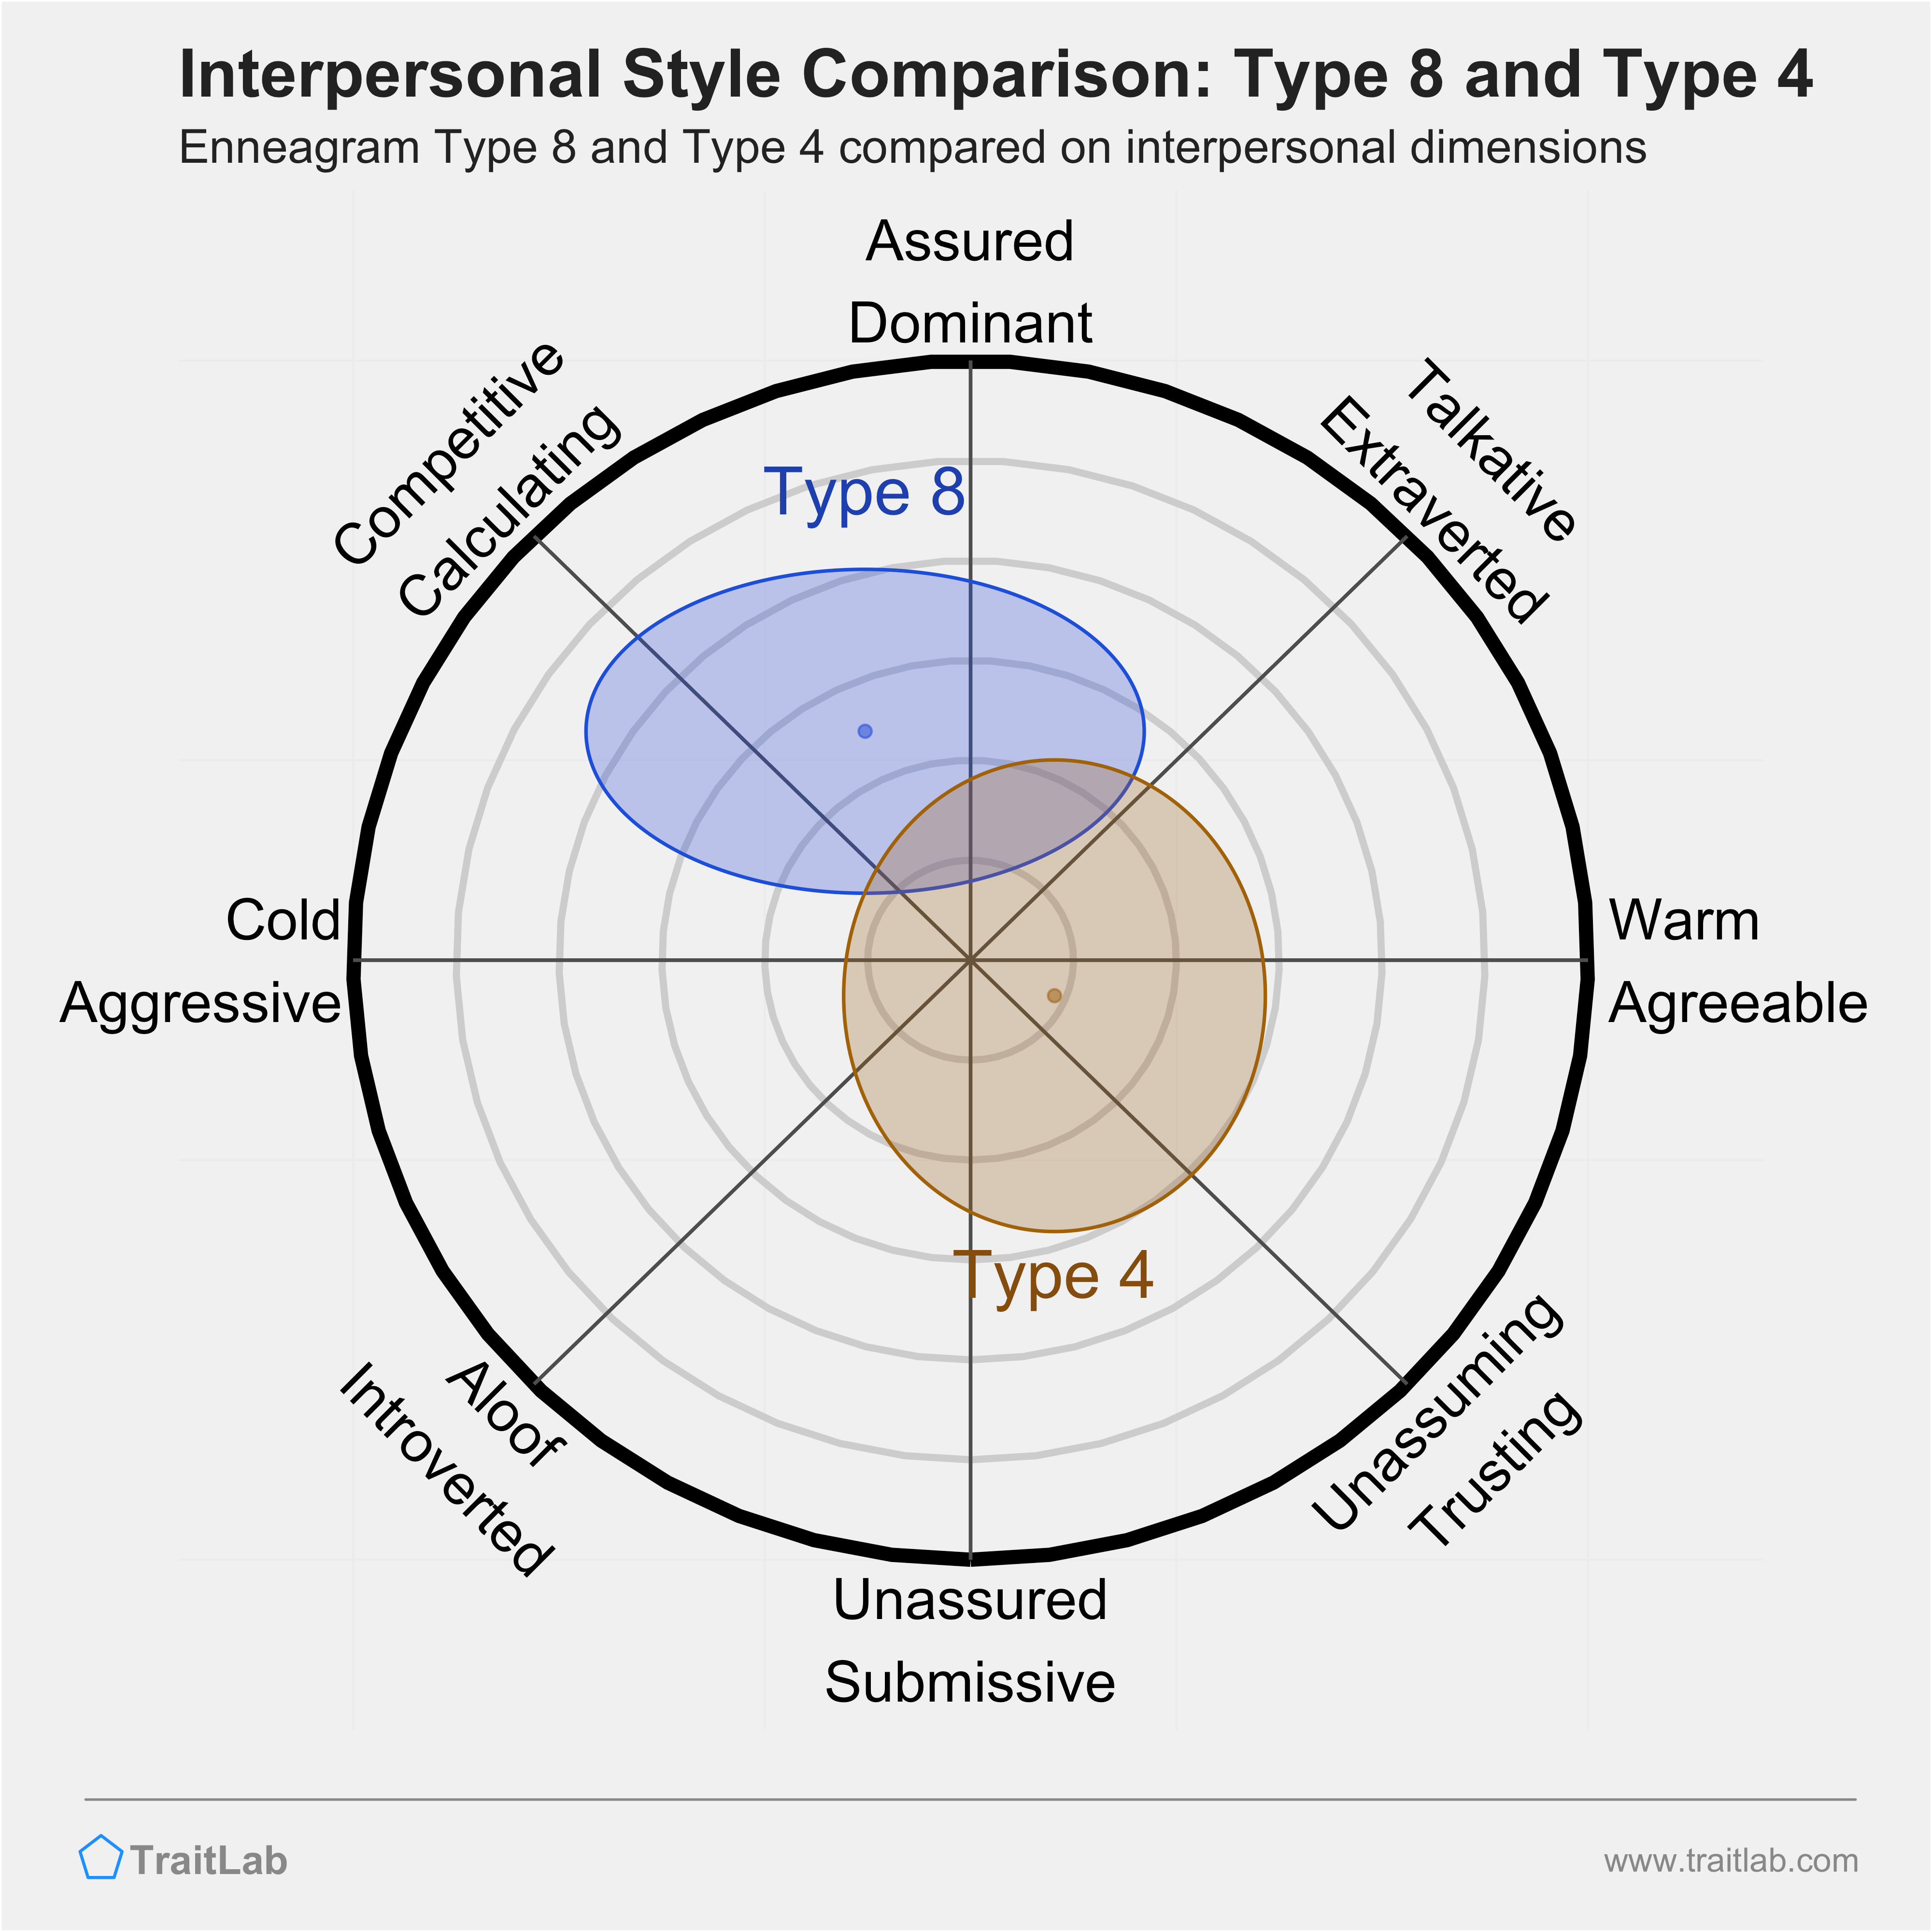 Enneagram Type 8 and Type 4 comparison across interpersonal dimensions